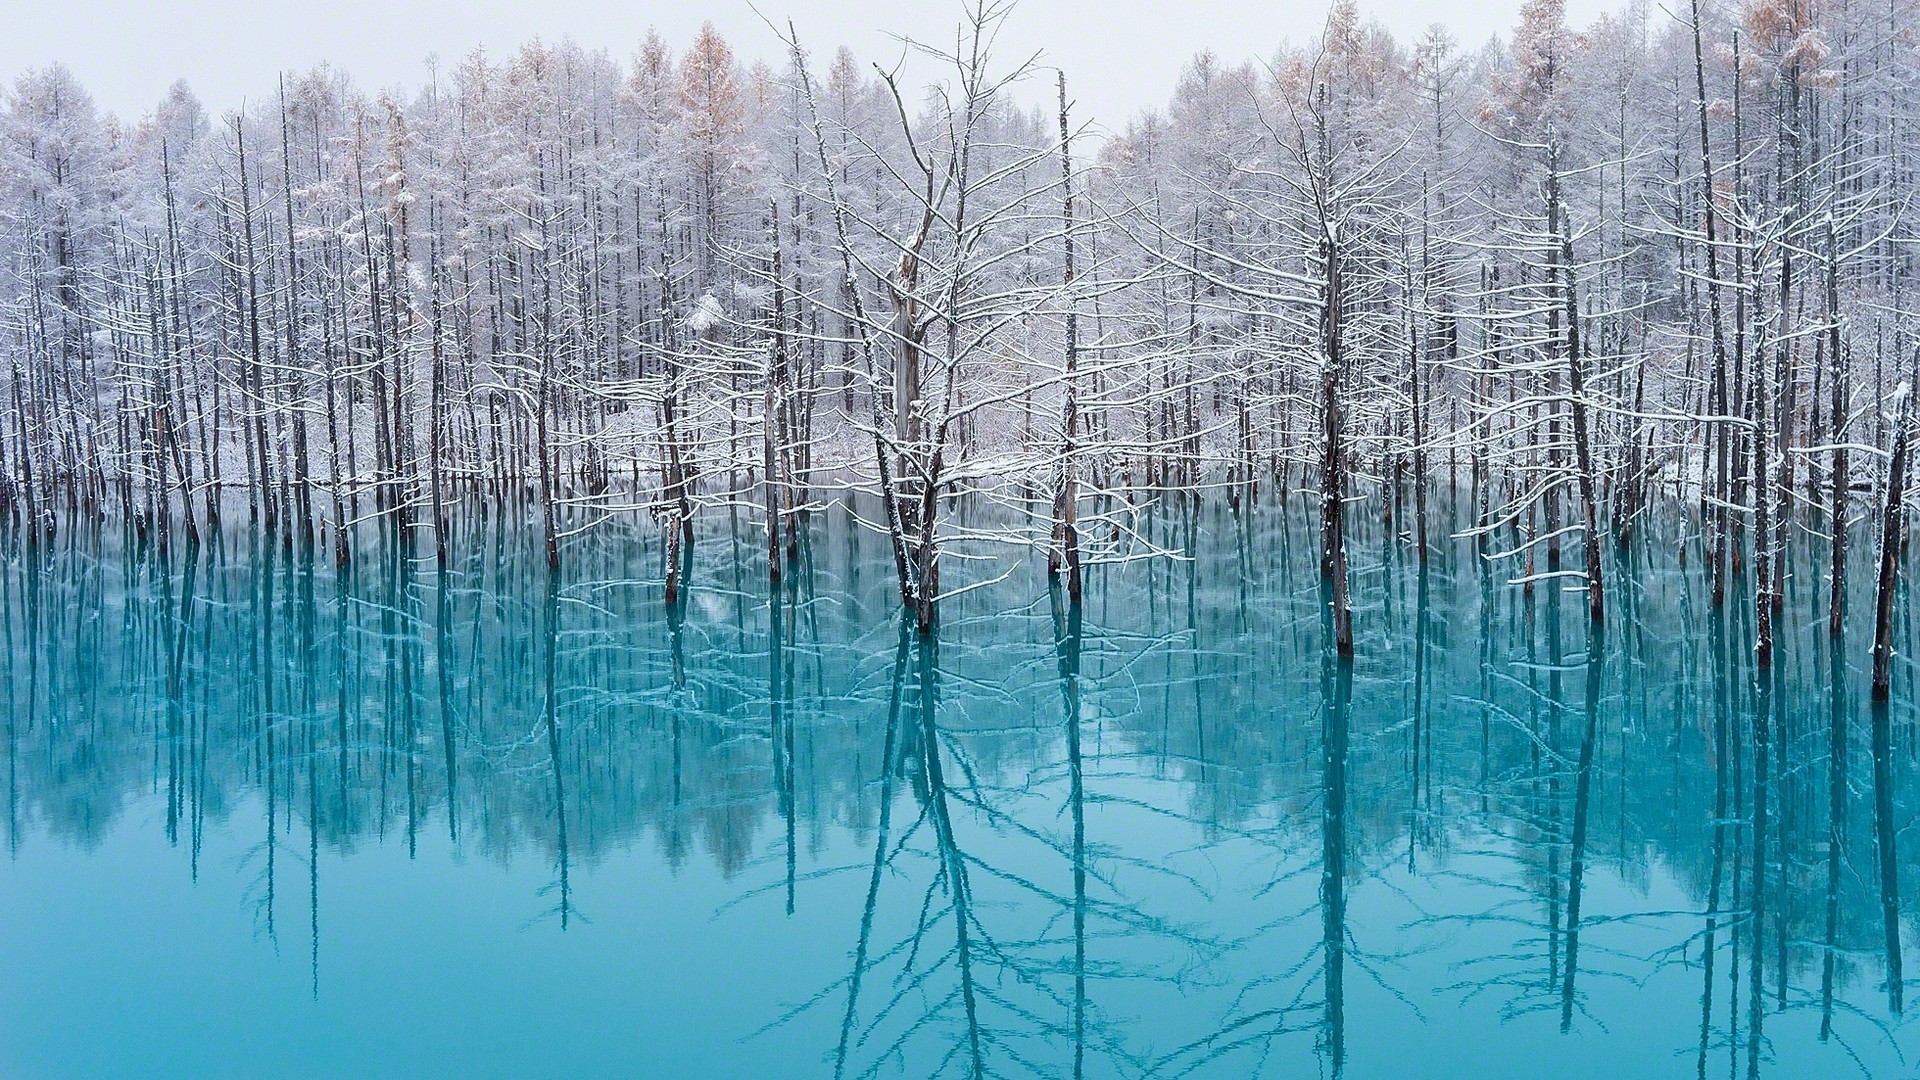 Lake, Trees, Nature, Turquoise, Water, Snow, Reflection, Winter, Japan, Landscape, Cold, Mist, Forest Wallpapers HD / Desktop and Mobile Backgrounds